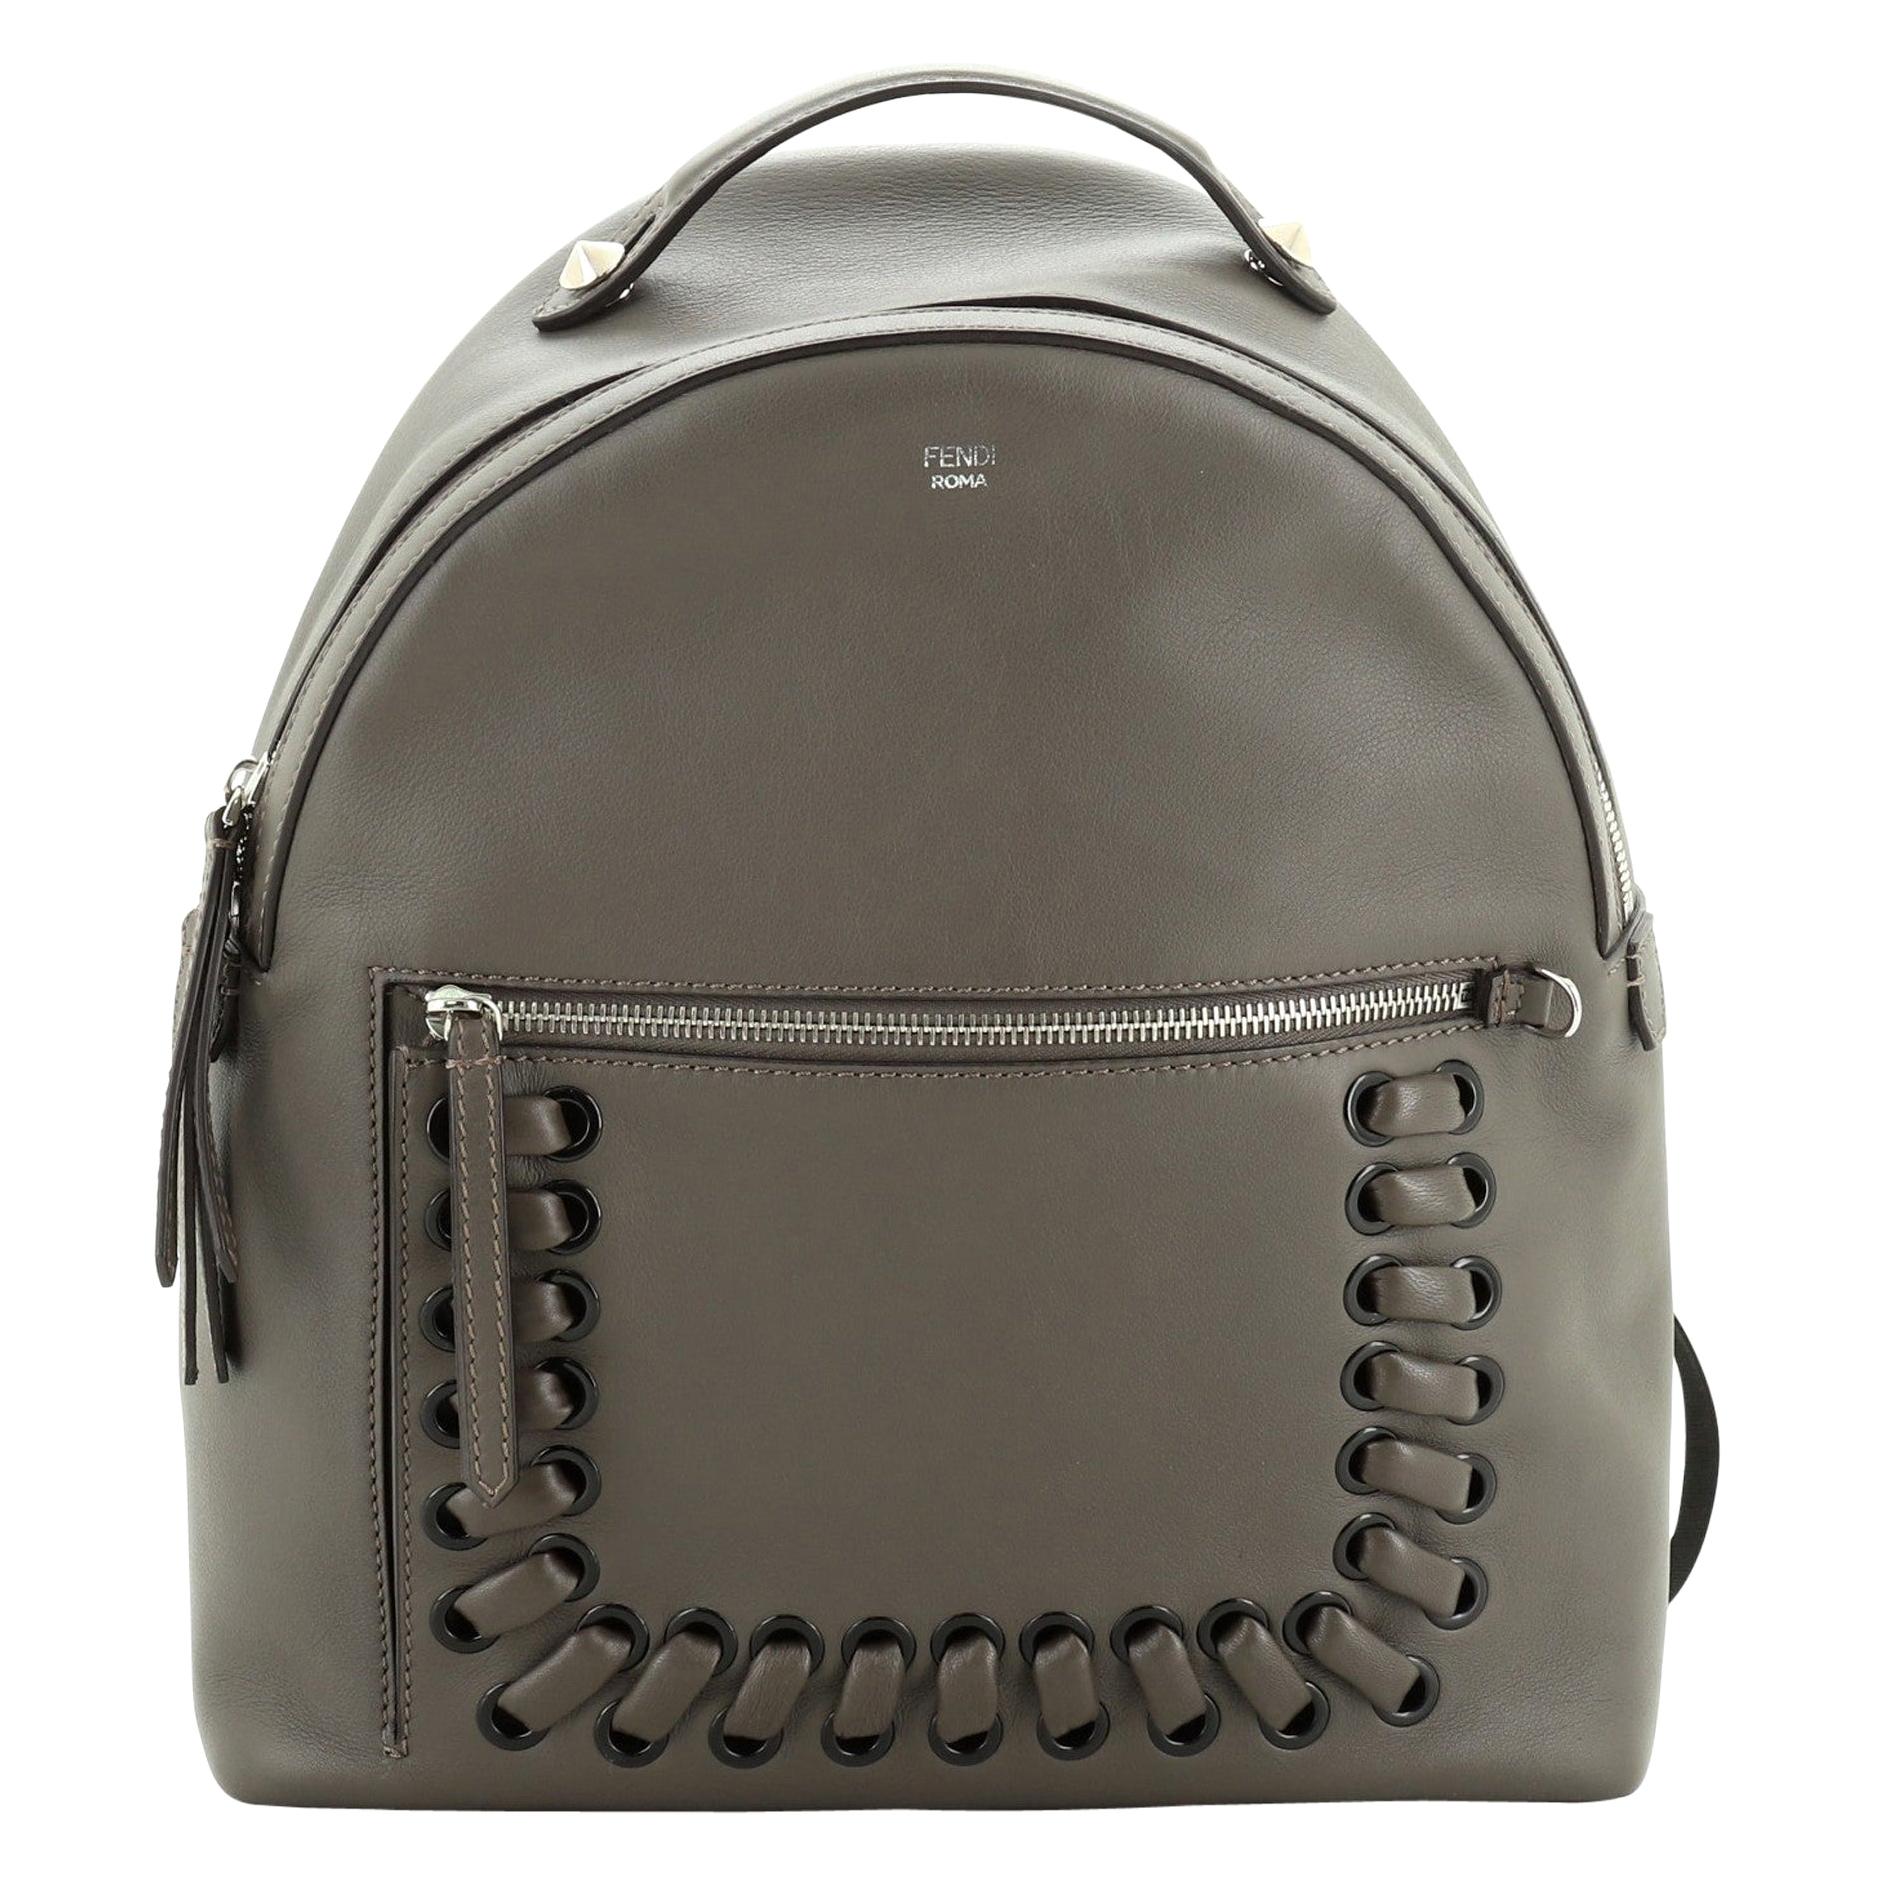 This Fendi By The Way Backpack Whipstitch Leather Medium, crafted in neutral leather, features leather top handle, adjustable leather straps, exterior front zip pocket, whipstitch details, and silver-tone hardware. Its zip closure opens to a gray